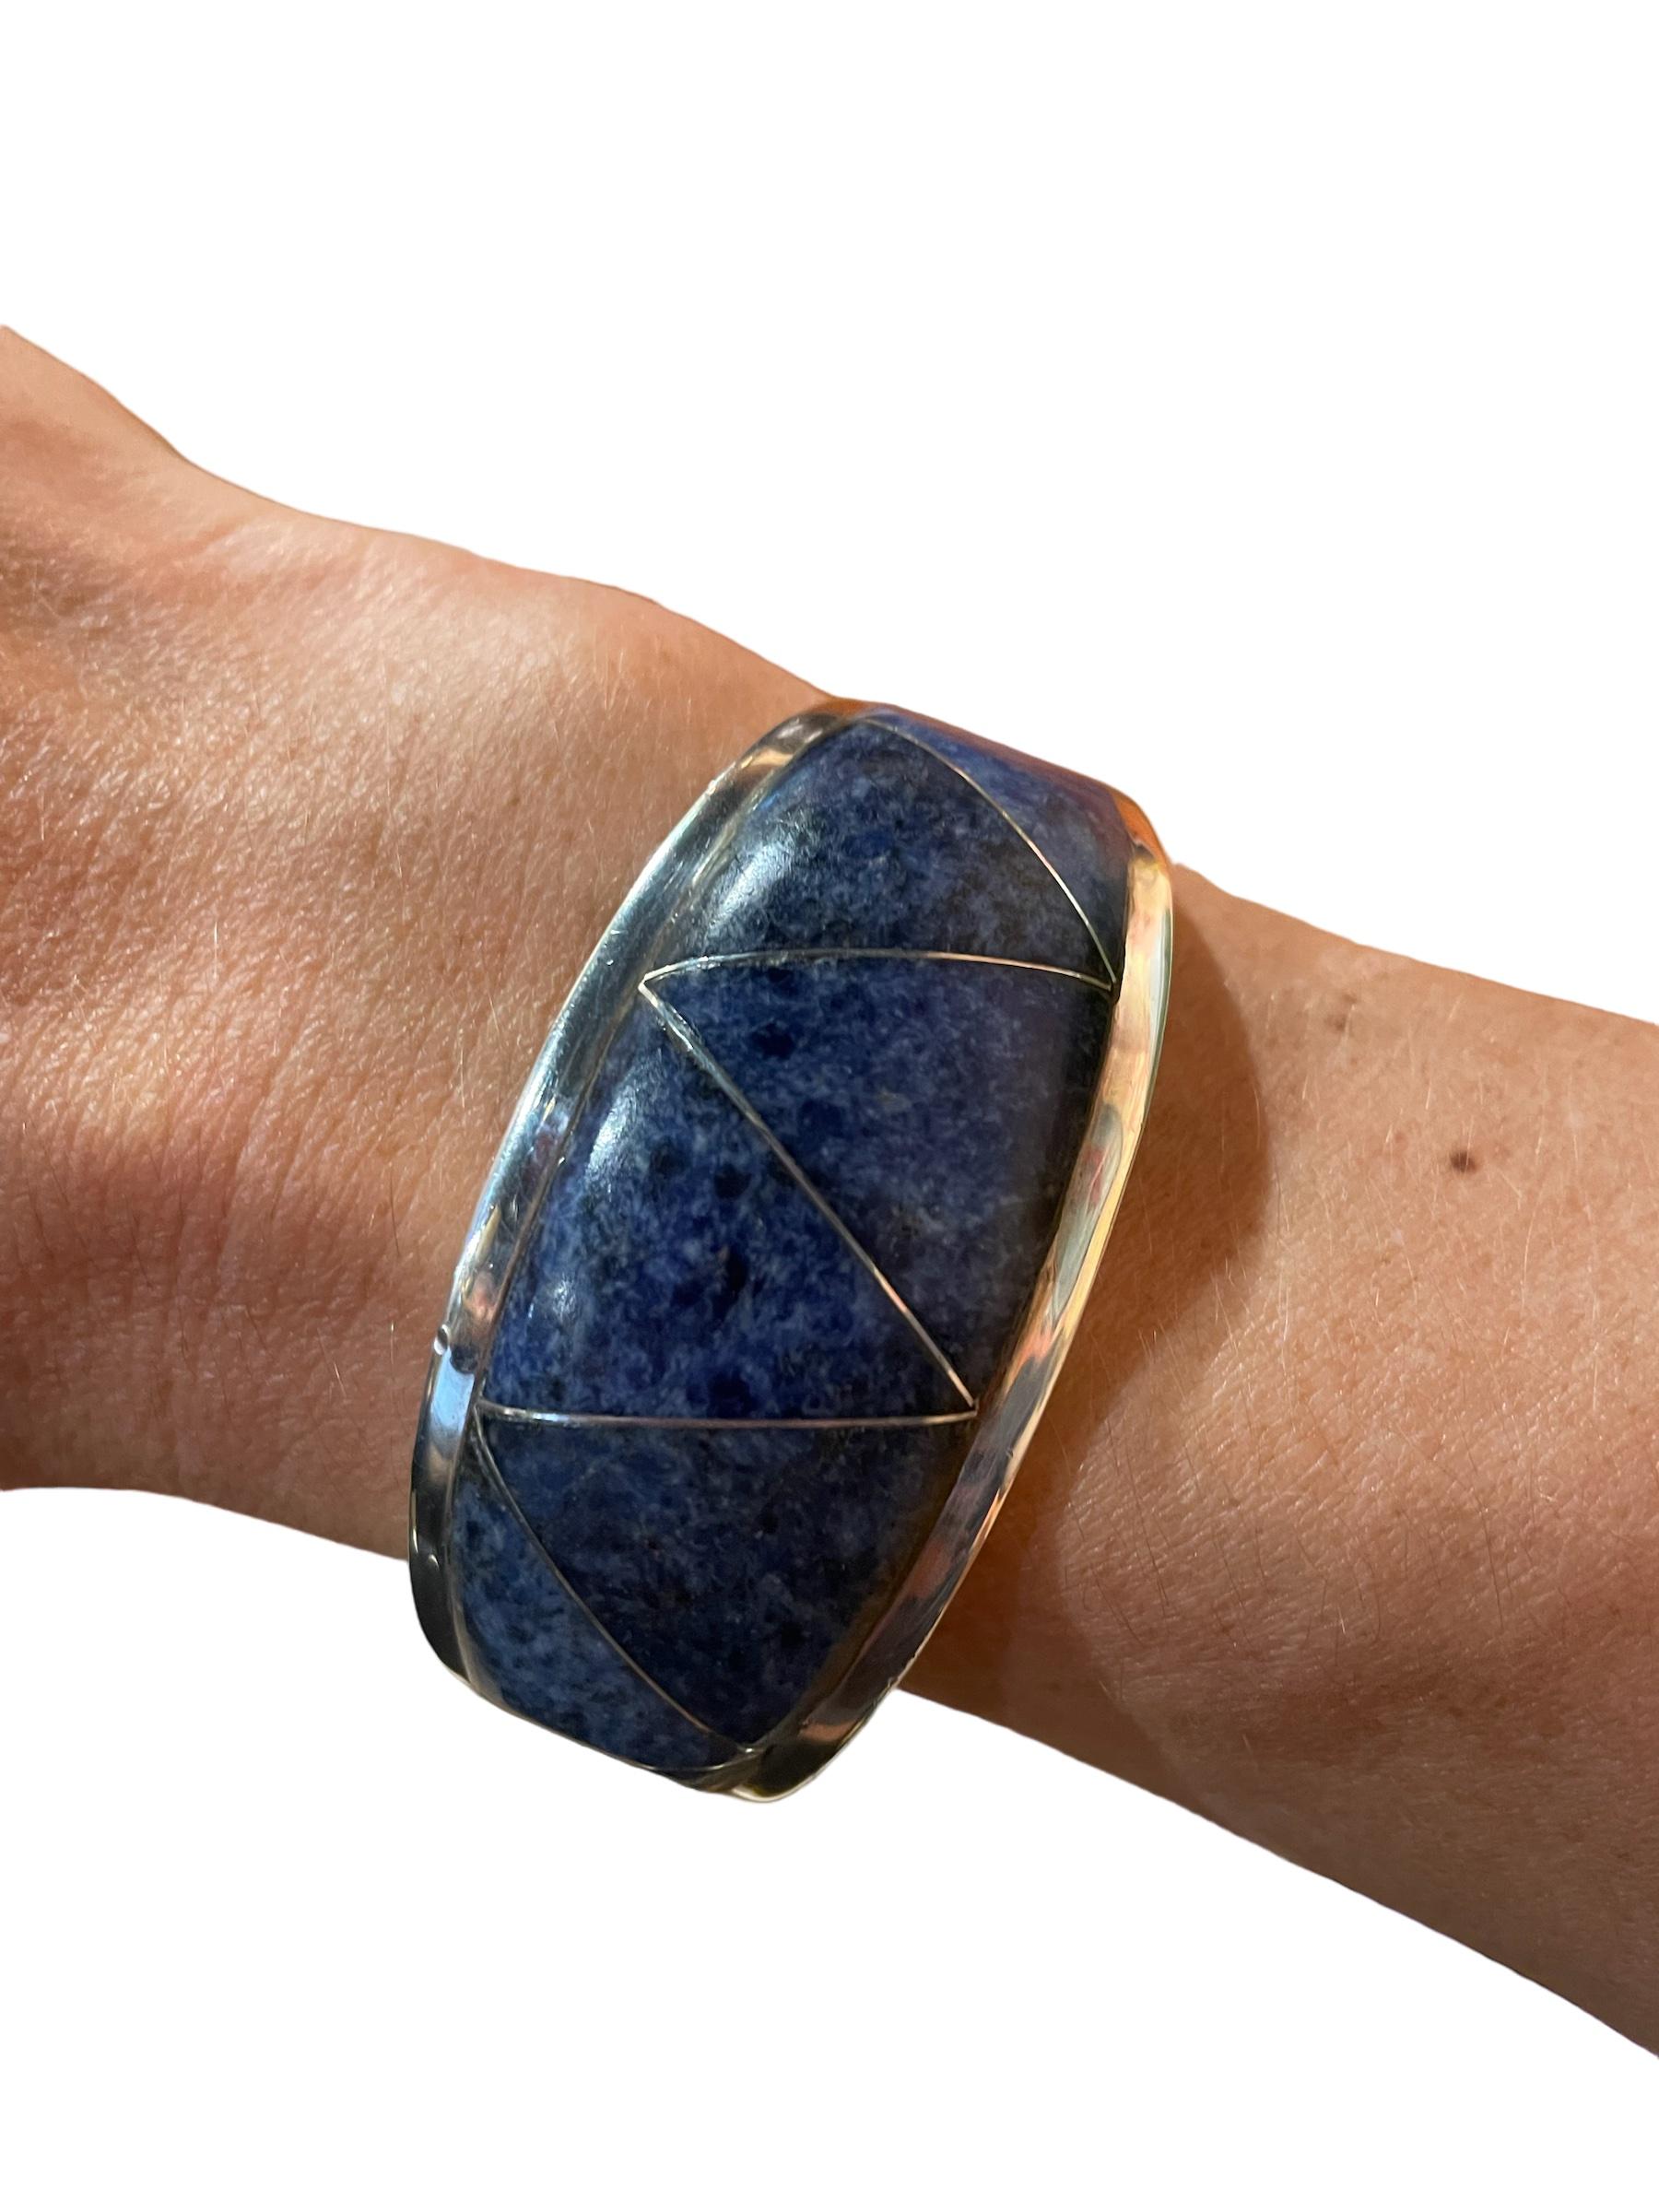 Taxco Sodalite 950 Sterling Silver Clamper Bracelet 

An amazing genuine Taxco blue sodalite and 950 sterling silver bangle-style hinged bracelet handmade and designed by Taxco artisan Alicia De La Paz. 

Weighs 78 grams and is stamped Alicia TD-40